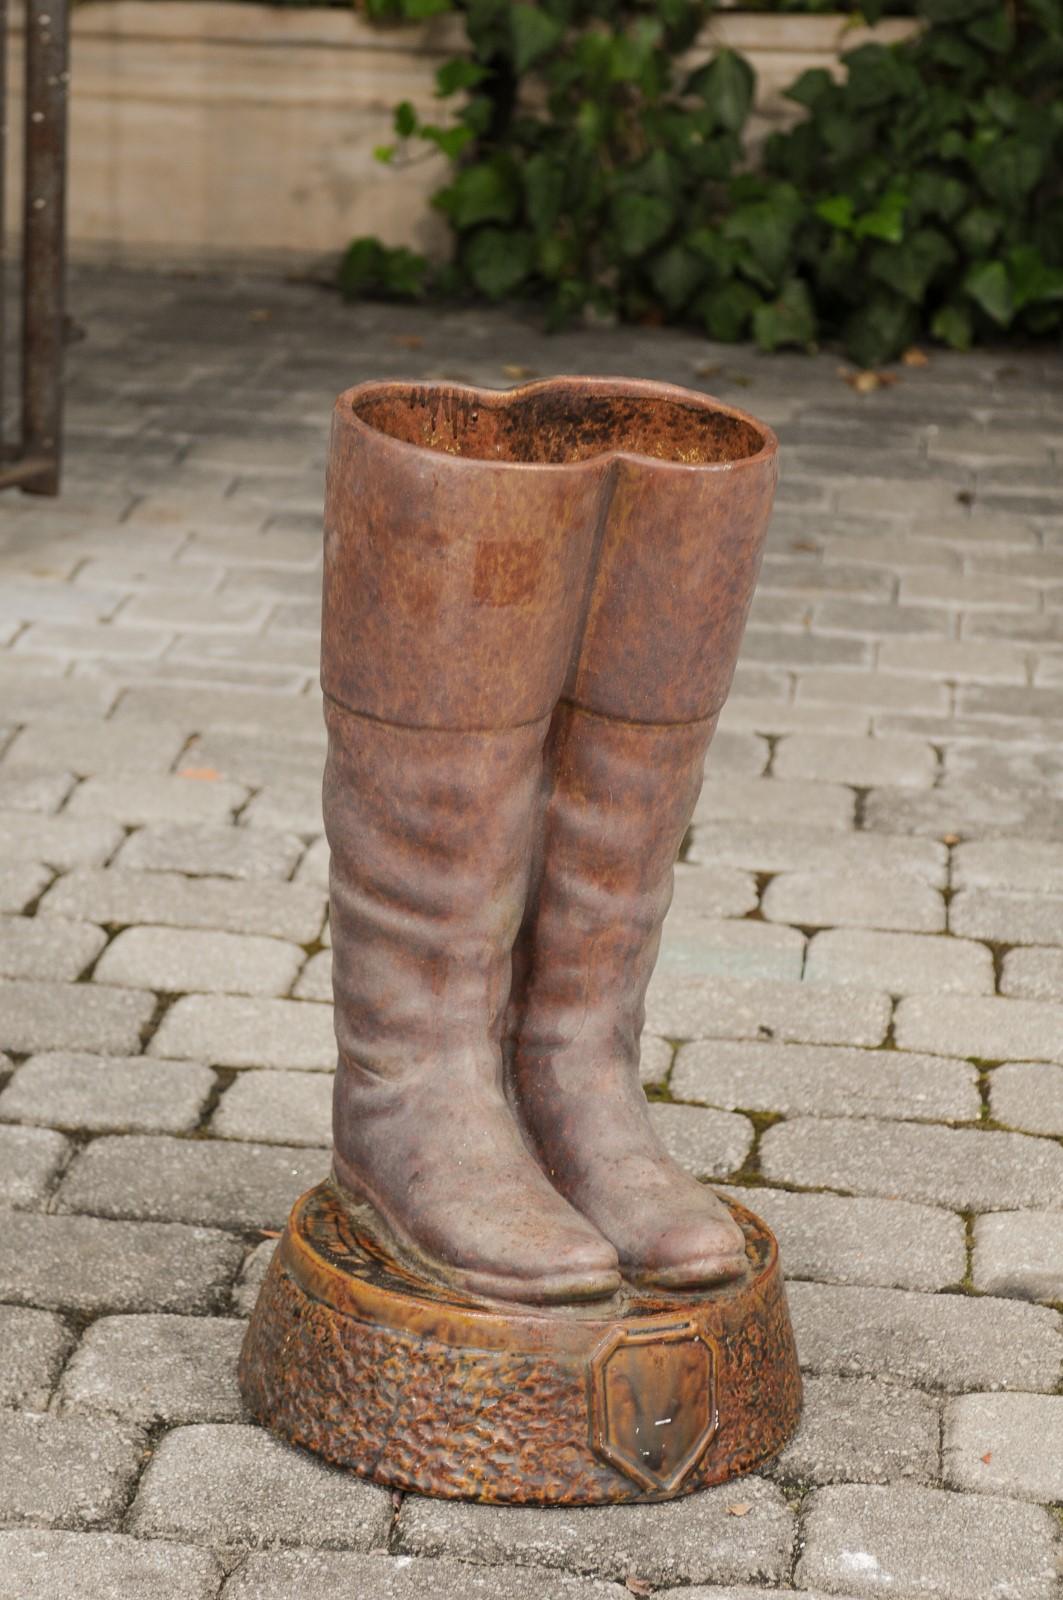  A contemporary terracotta umbrella stand from the early 21st century depicting boots resting on a circular base. This terracotta umbrella stand features a pair of brown riding boots resting on a circular tapering base, accented with a shield-shaped